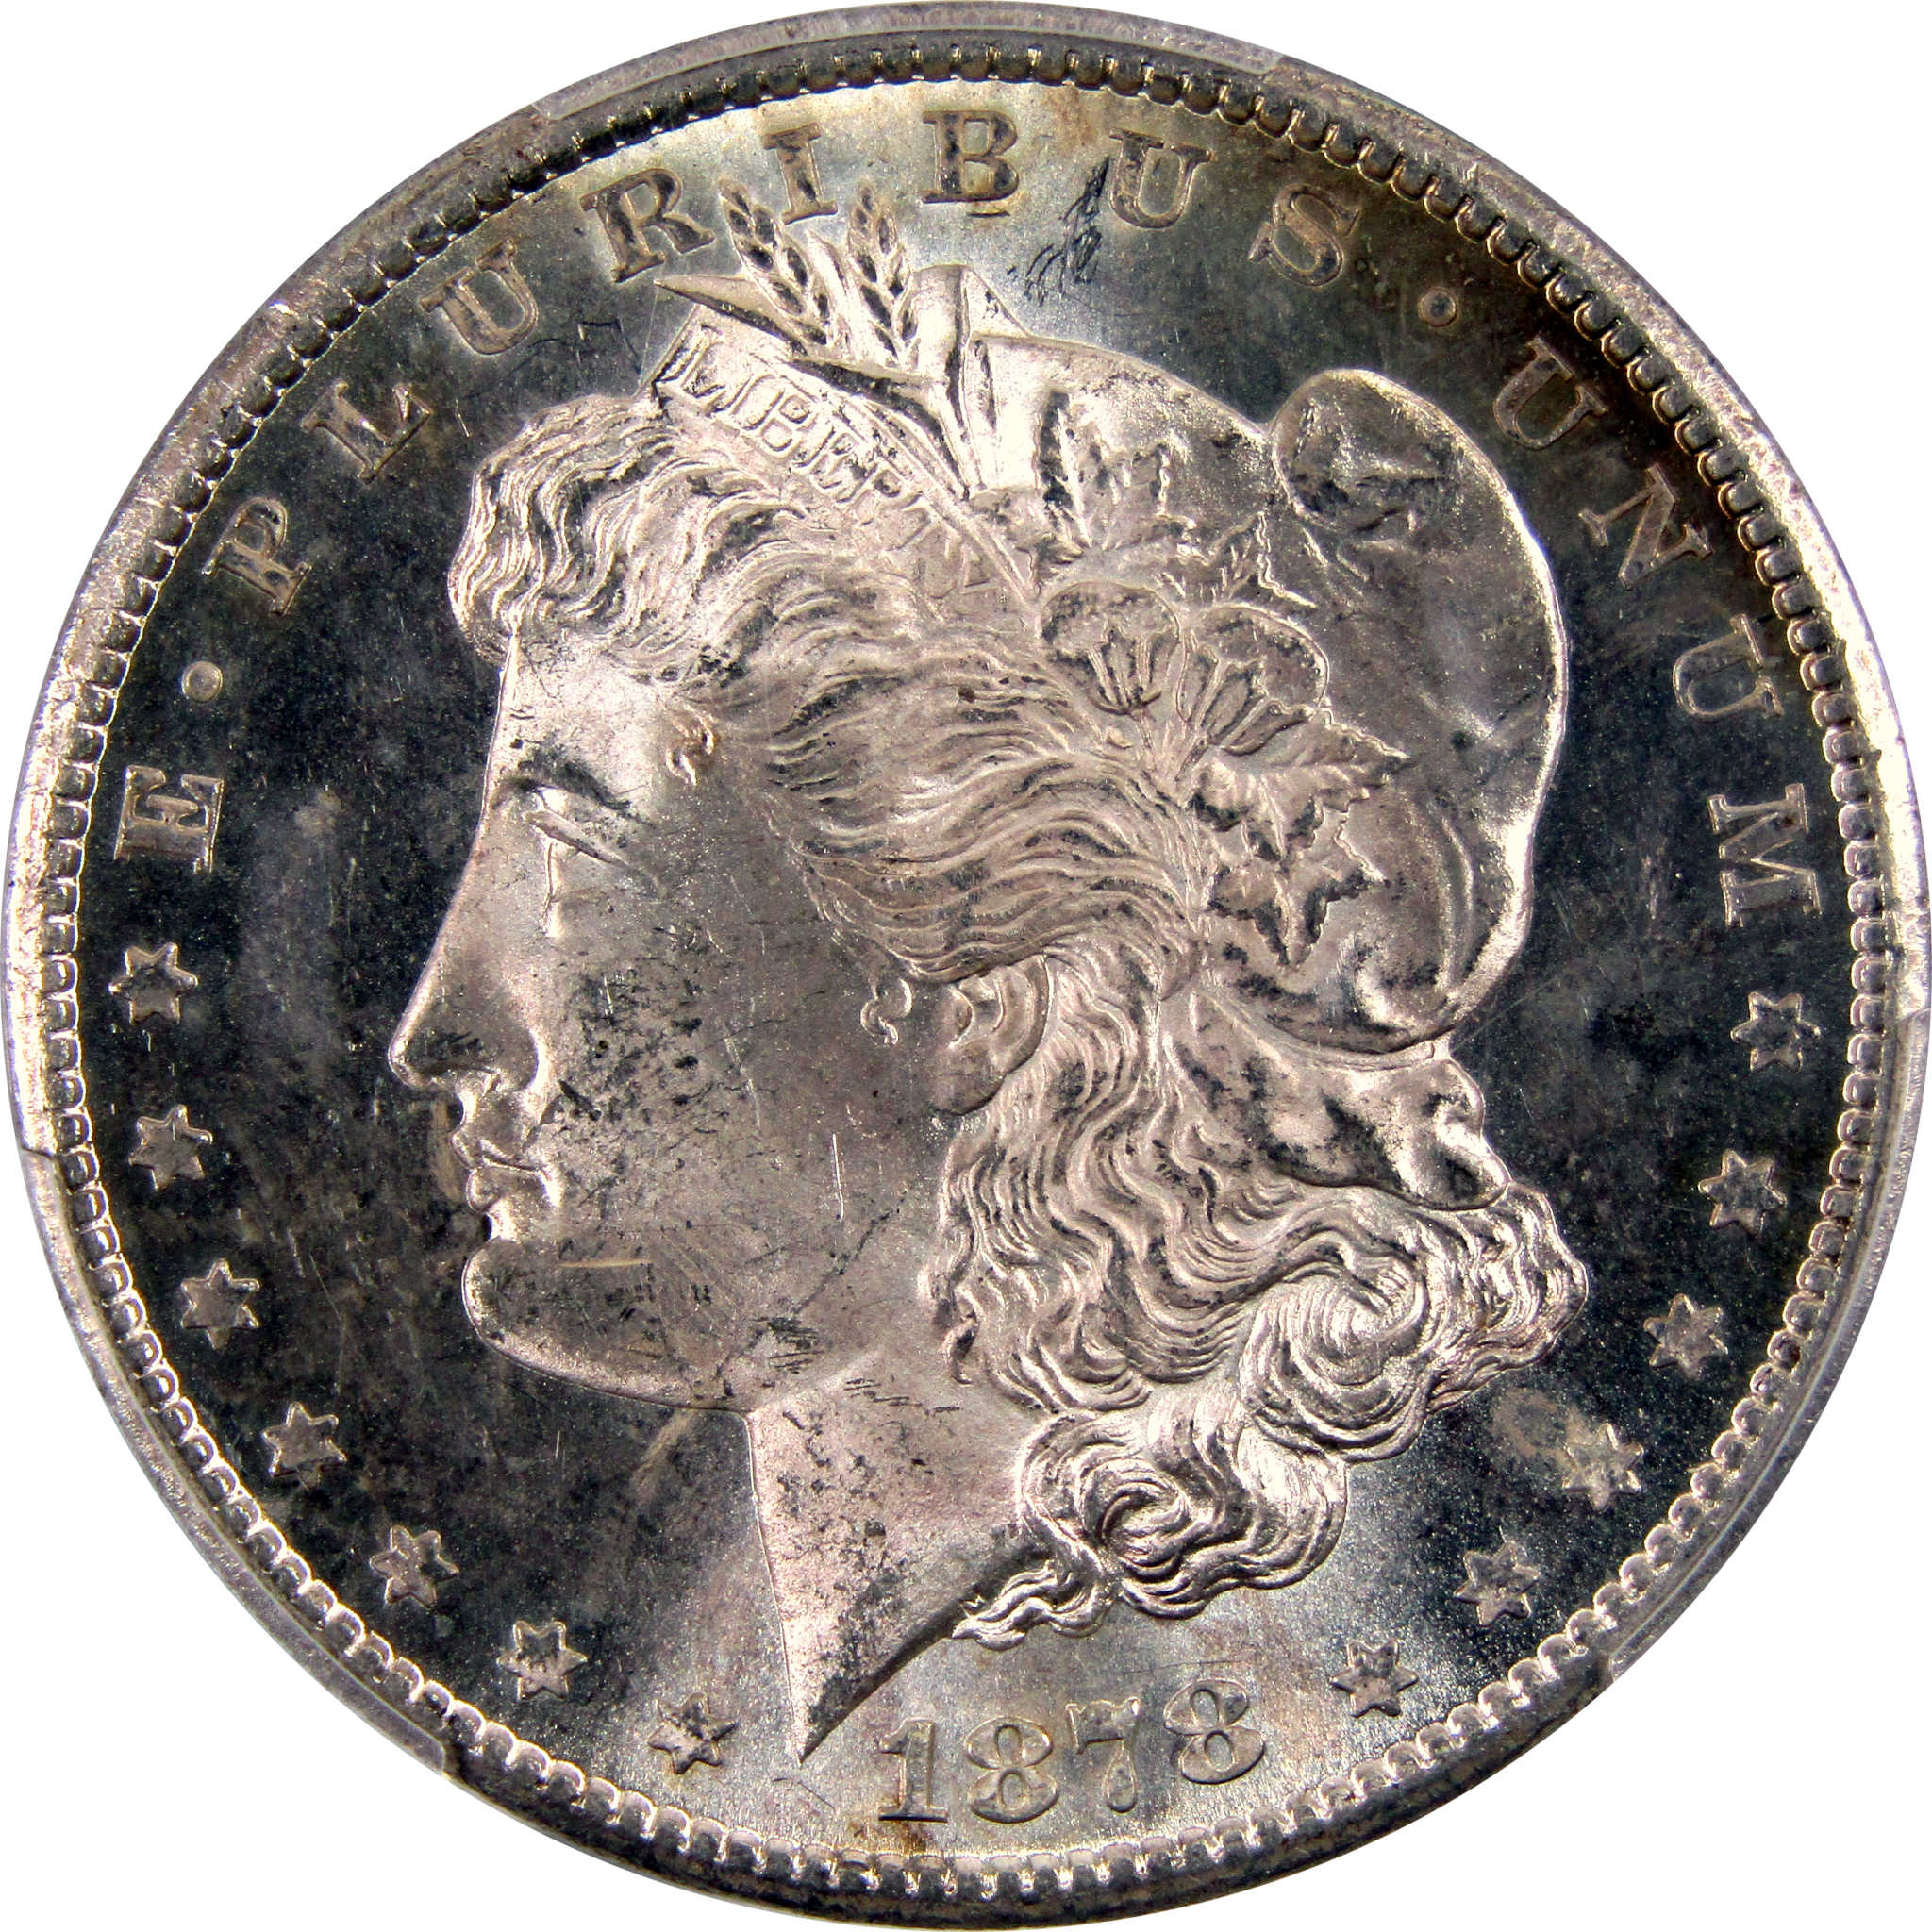 1878 CC Morgan Dollar MS 63 PCGS 90% Silver $1 Unc SKU:I9145 - Morgan coin - Morgan silver dollar - Morgan silver dollar for sale - Profile Coins &amp; Collectibles